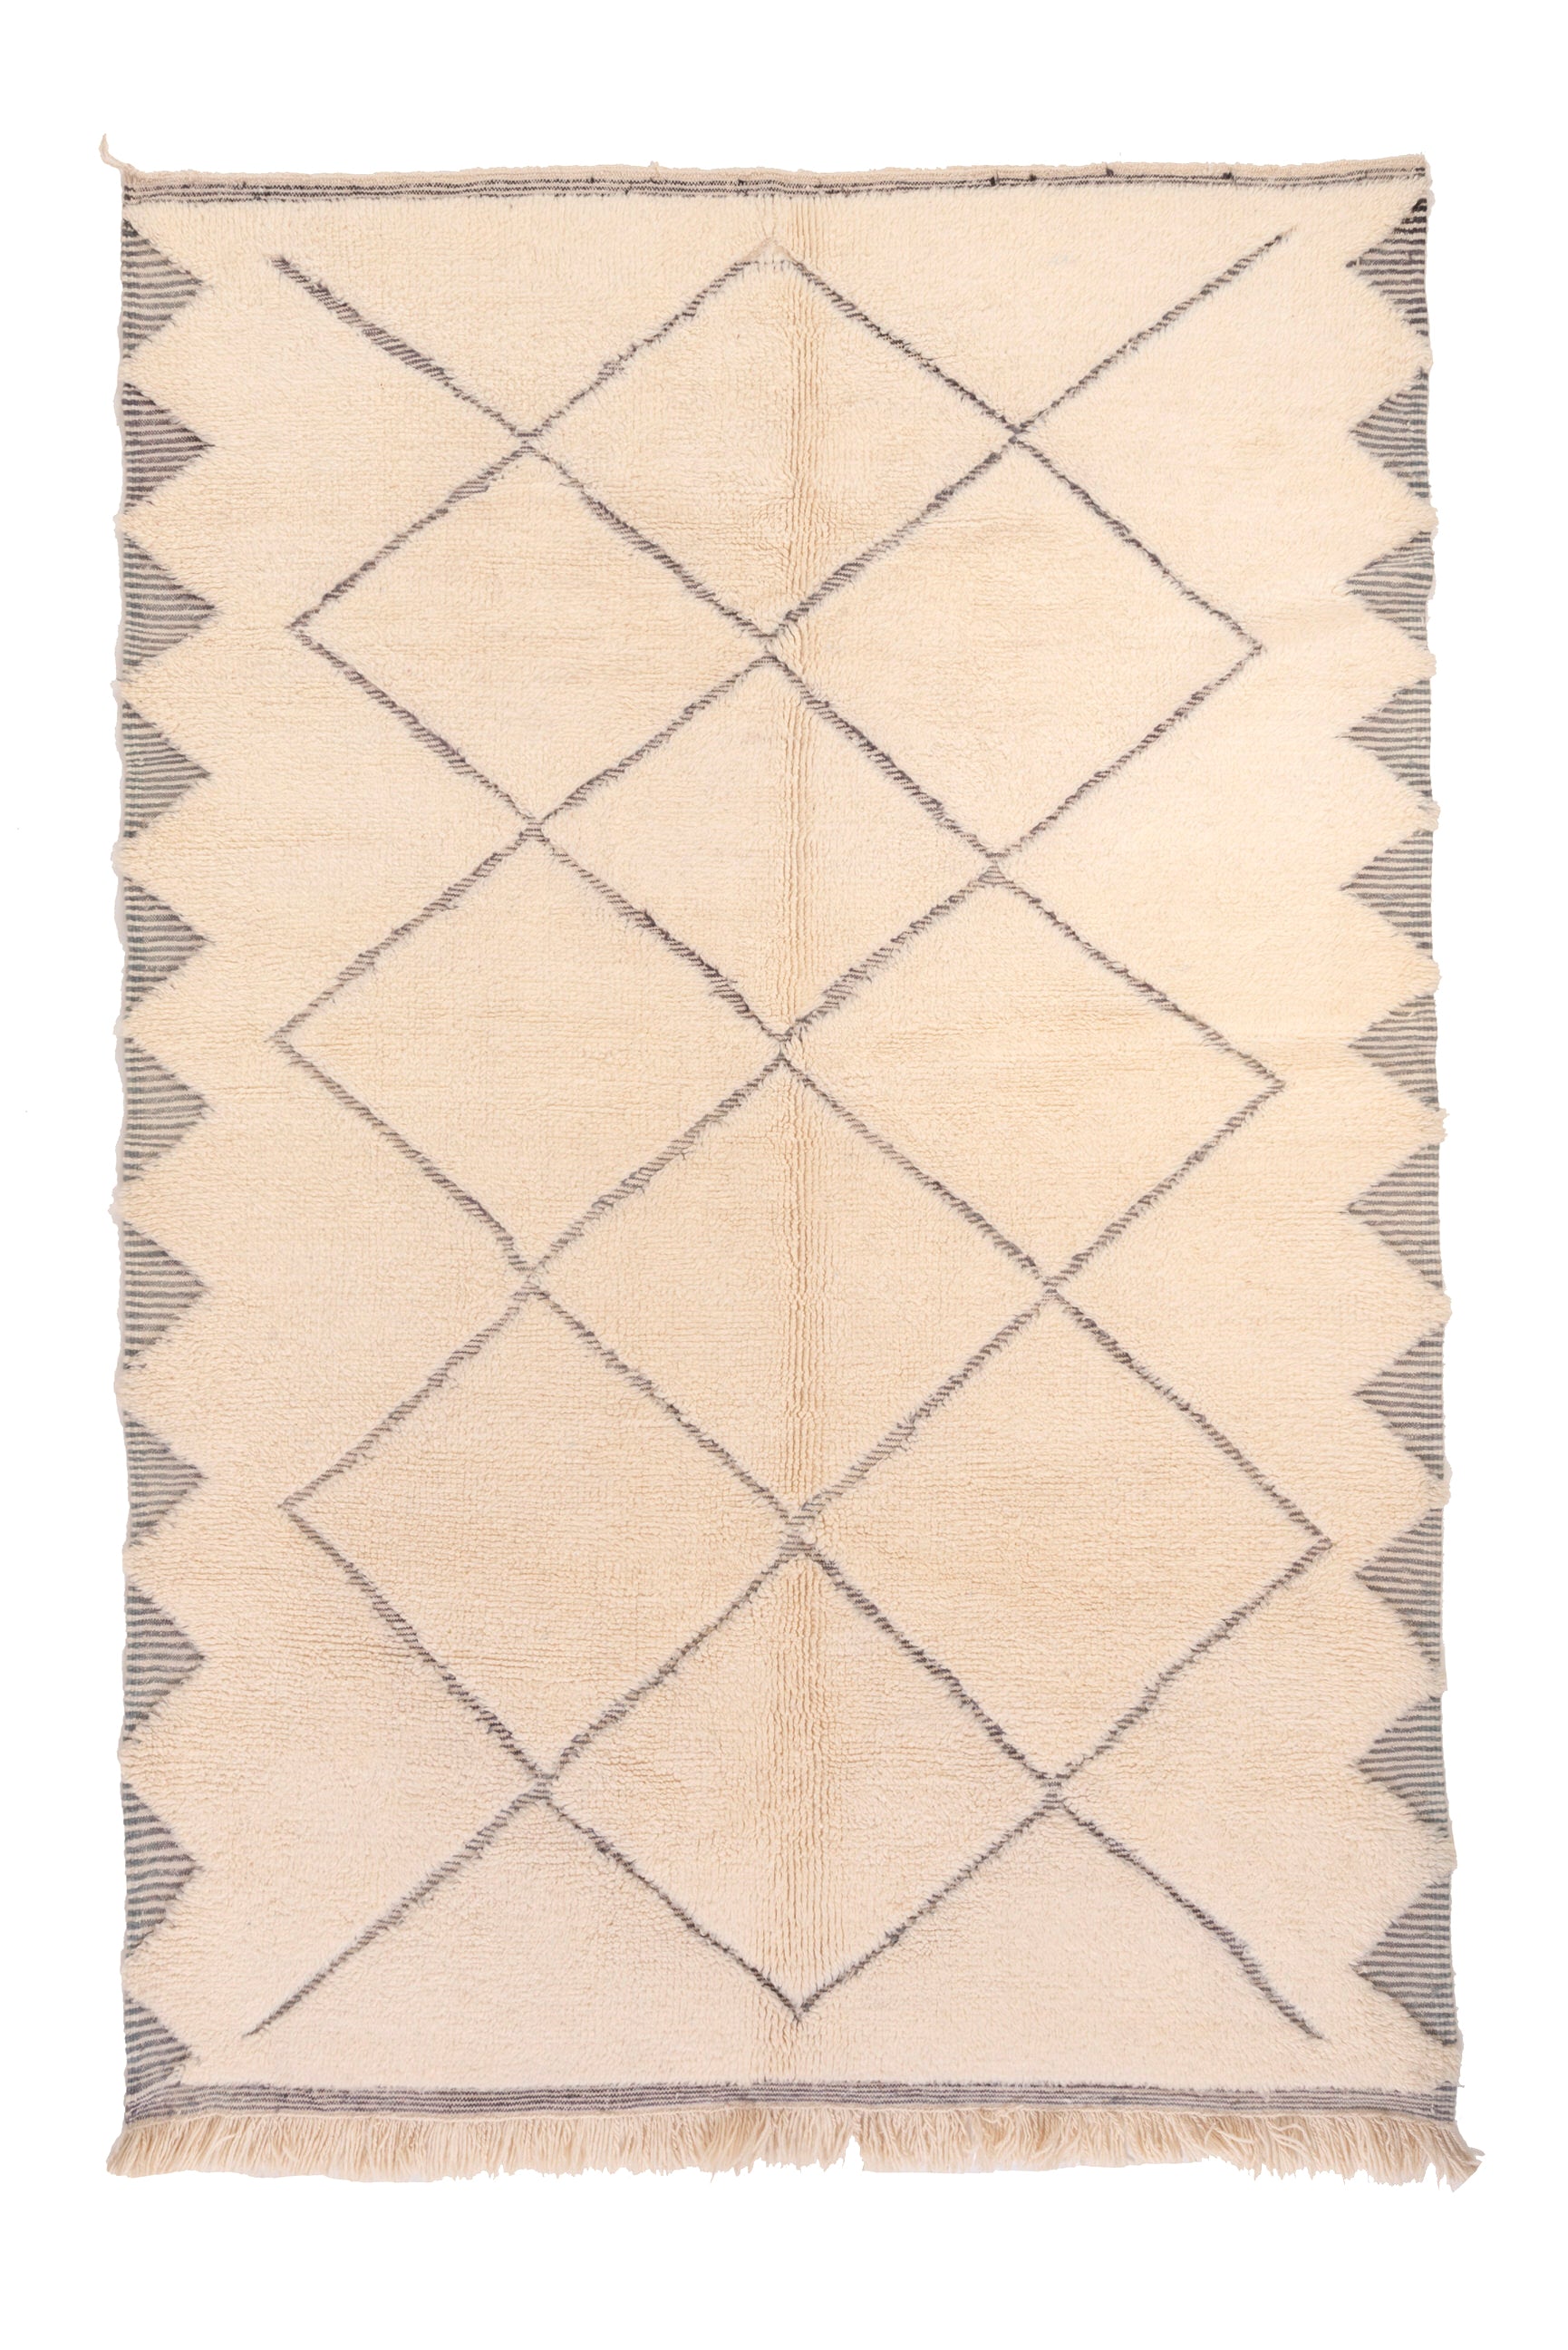 Enhance your space with our Ivory 3D Crosshatch Rug. This meticulously crafted rug features a captivating crisscross pattern in ivory and dark gray, creating a striking 3D effect that adds depth and sophistication to your decor.